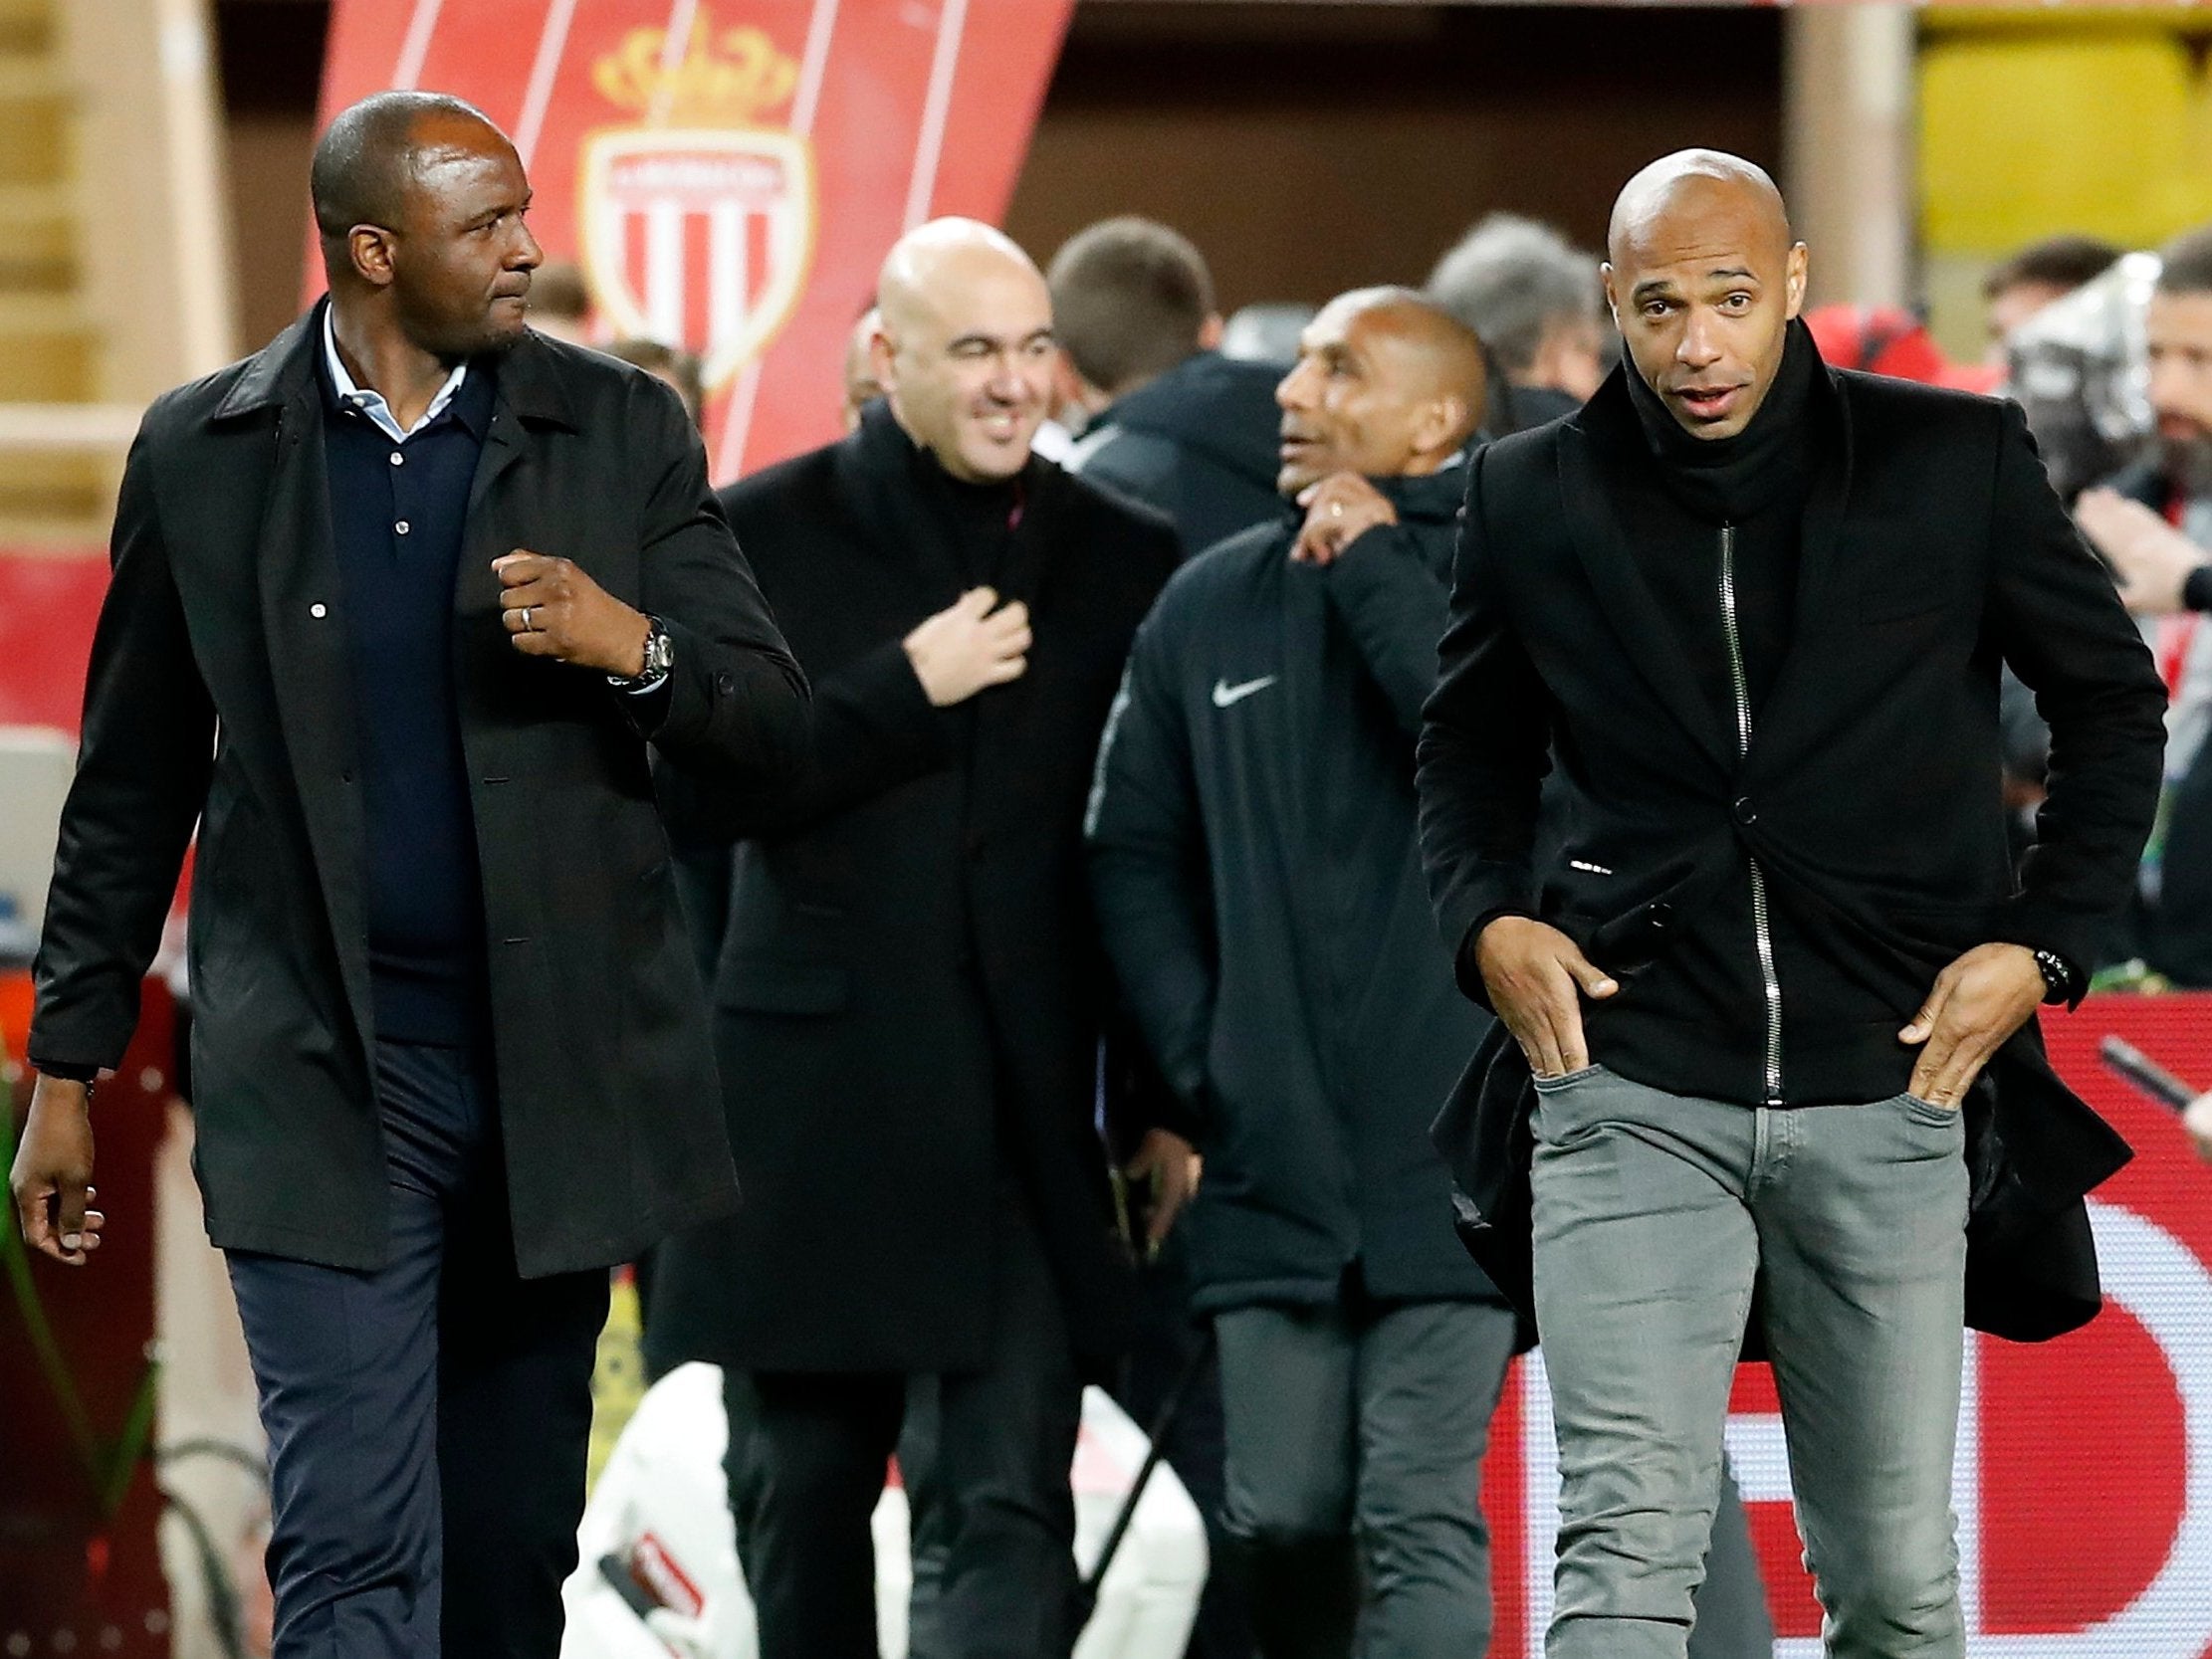 Thierry Henry and Patrick Vieira stride on to the pitch before kick-off